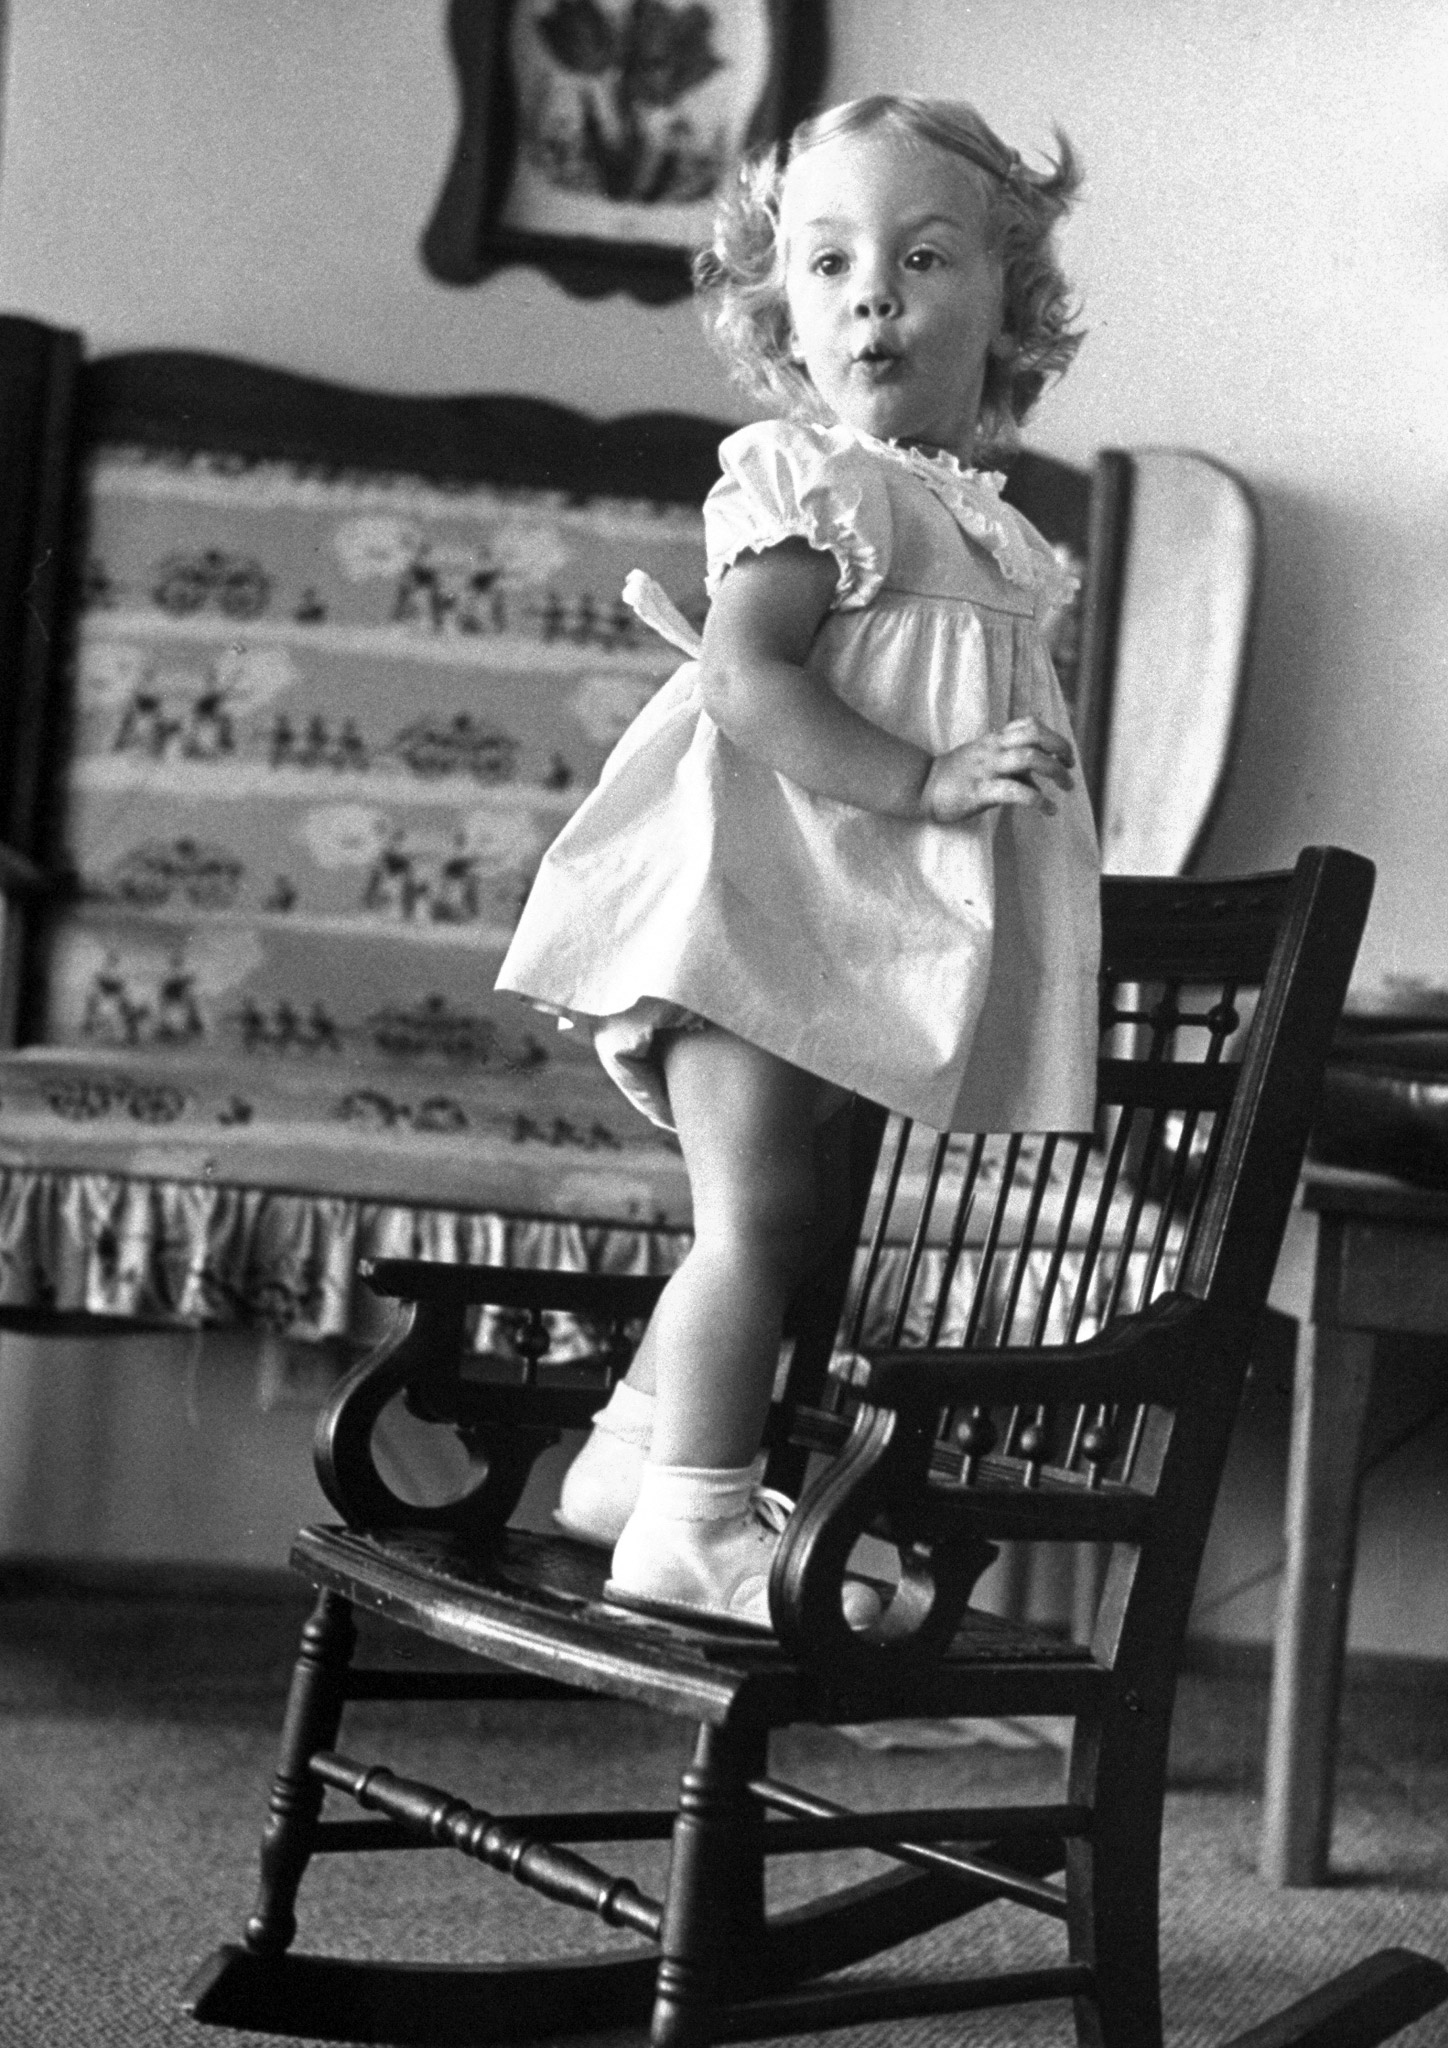 Favorite trick is climbing on a family heirloom given her by Grandmother. Then she stands up in chair to show off.